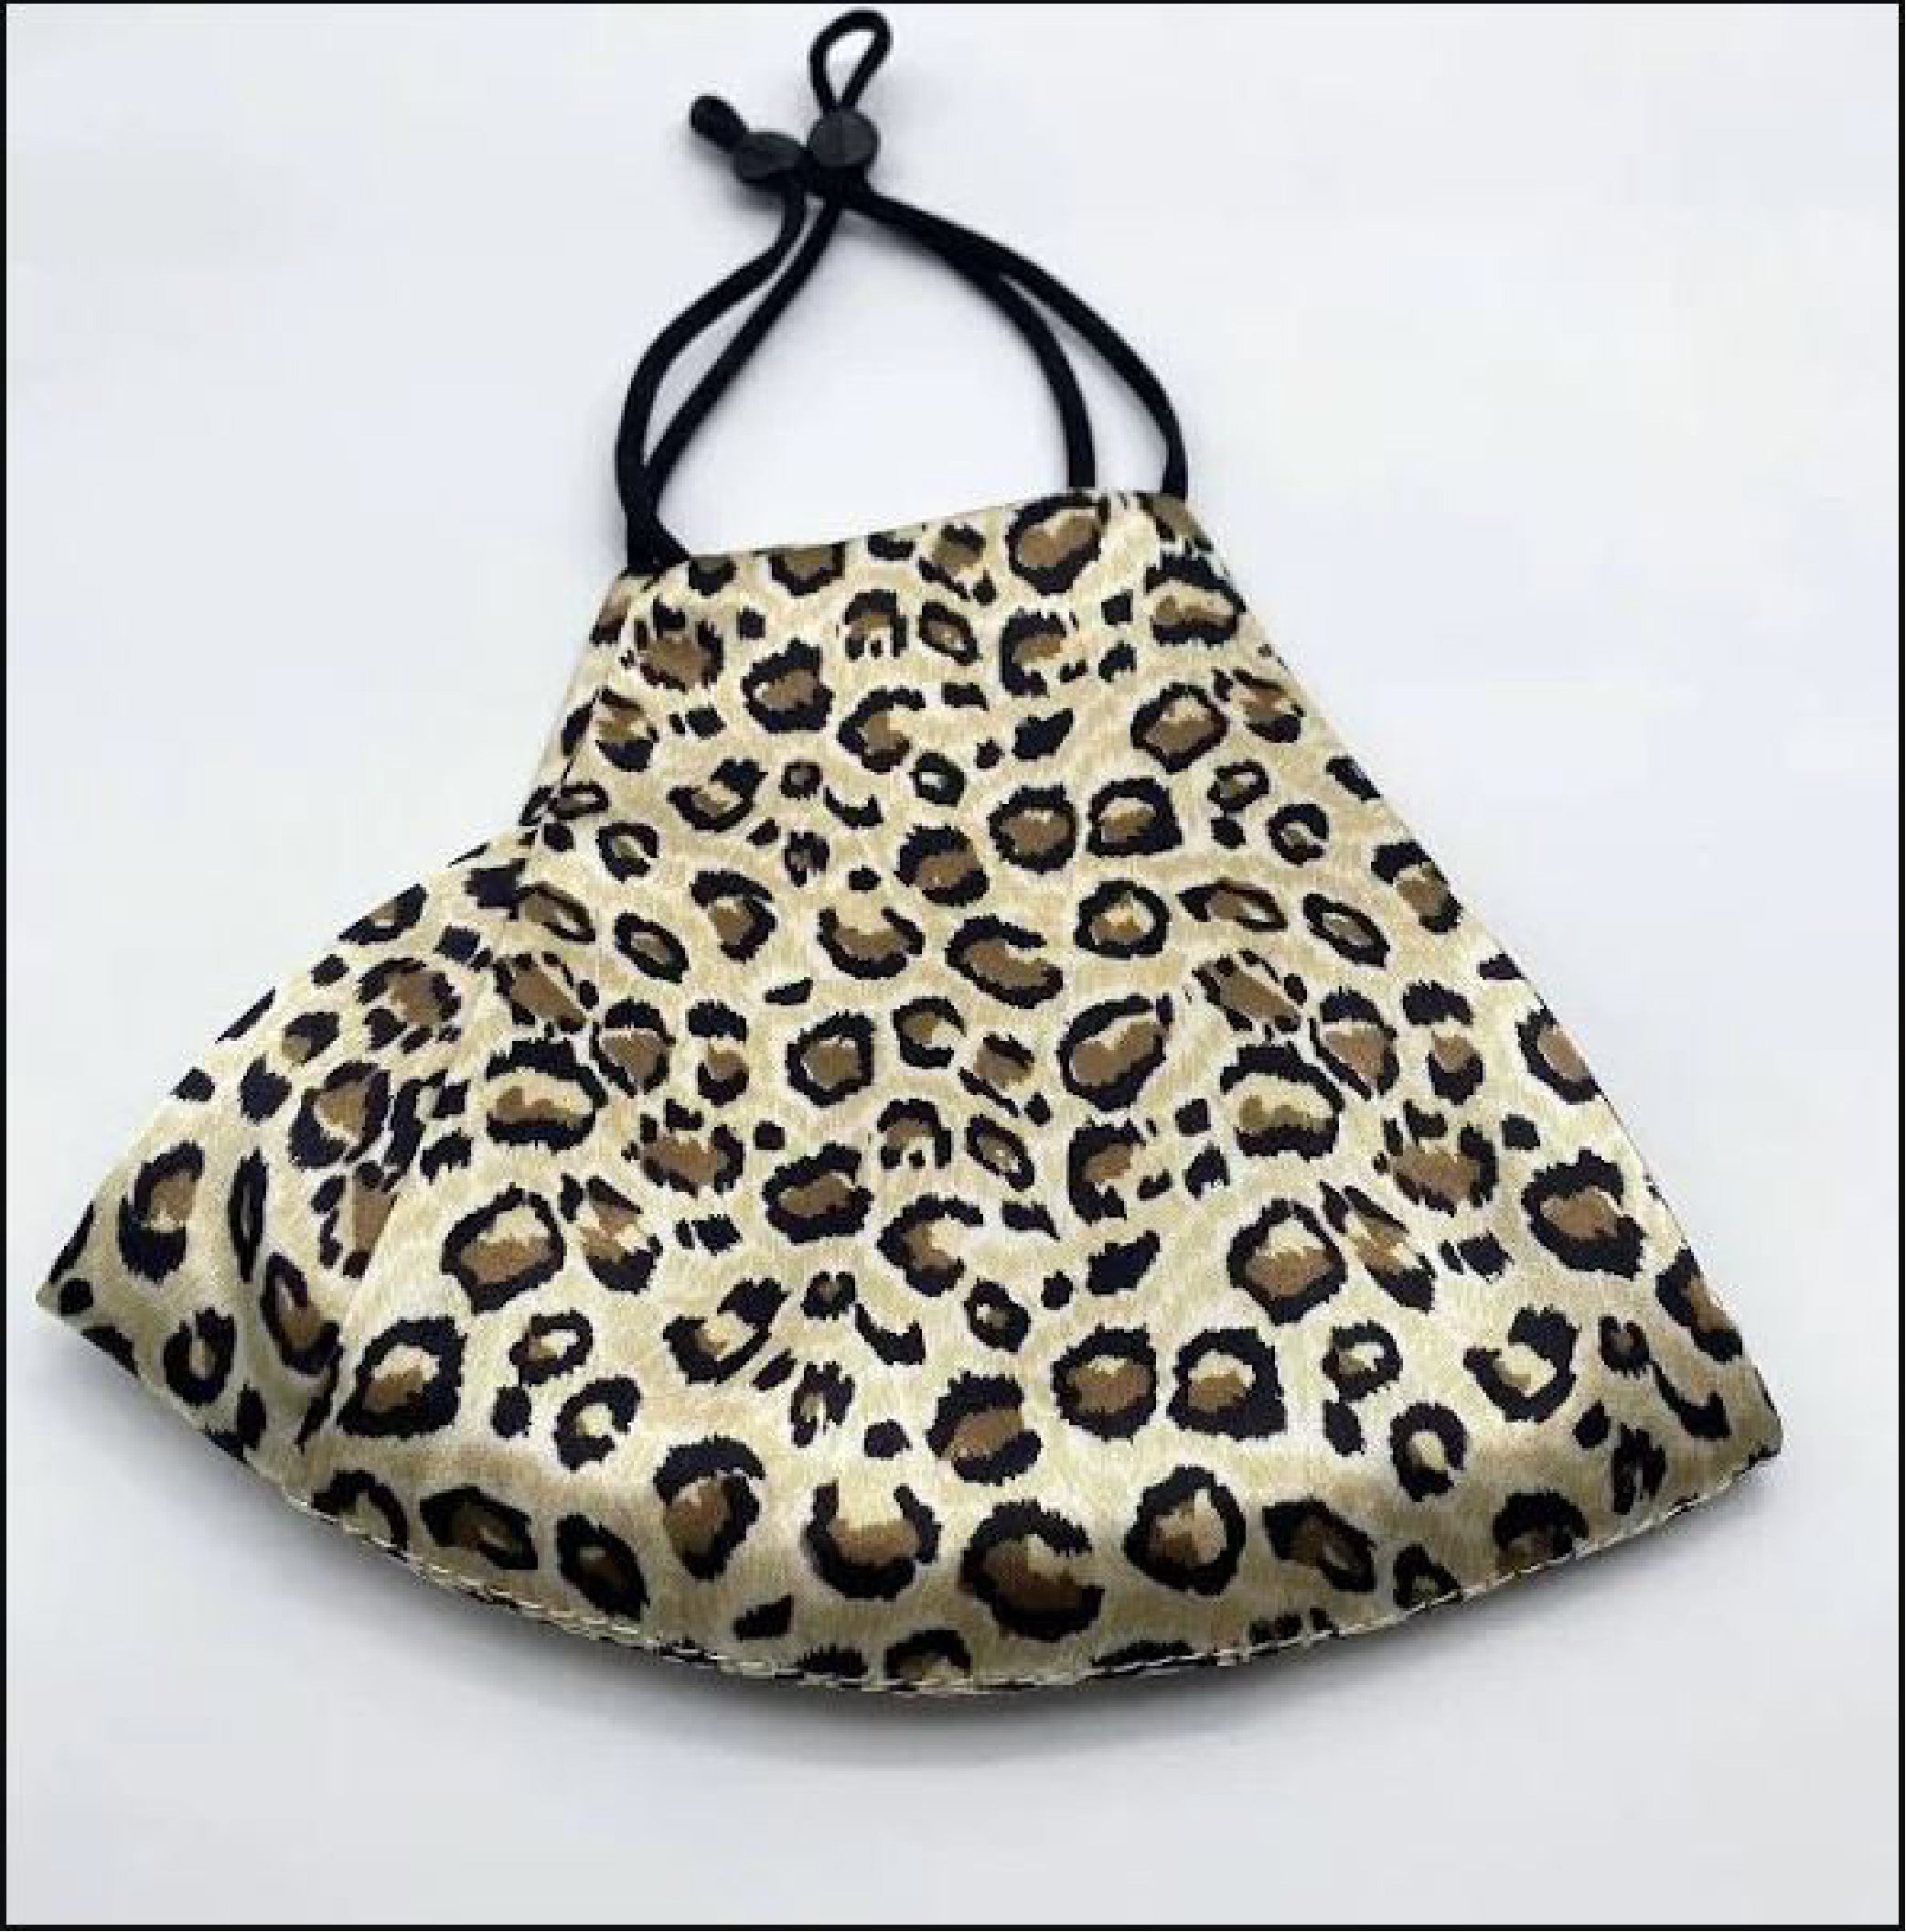 100% Silk Face Masks - USA Made - Adjustable Coverings - Leopard - pm 2.5 filter included